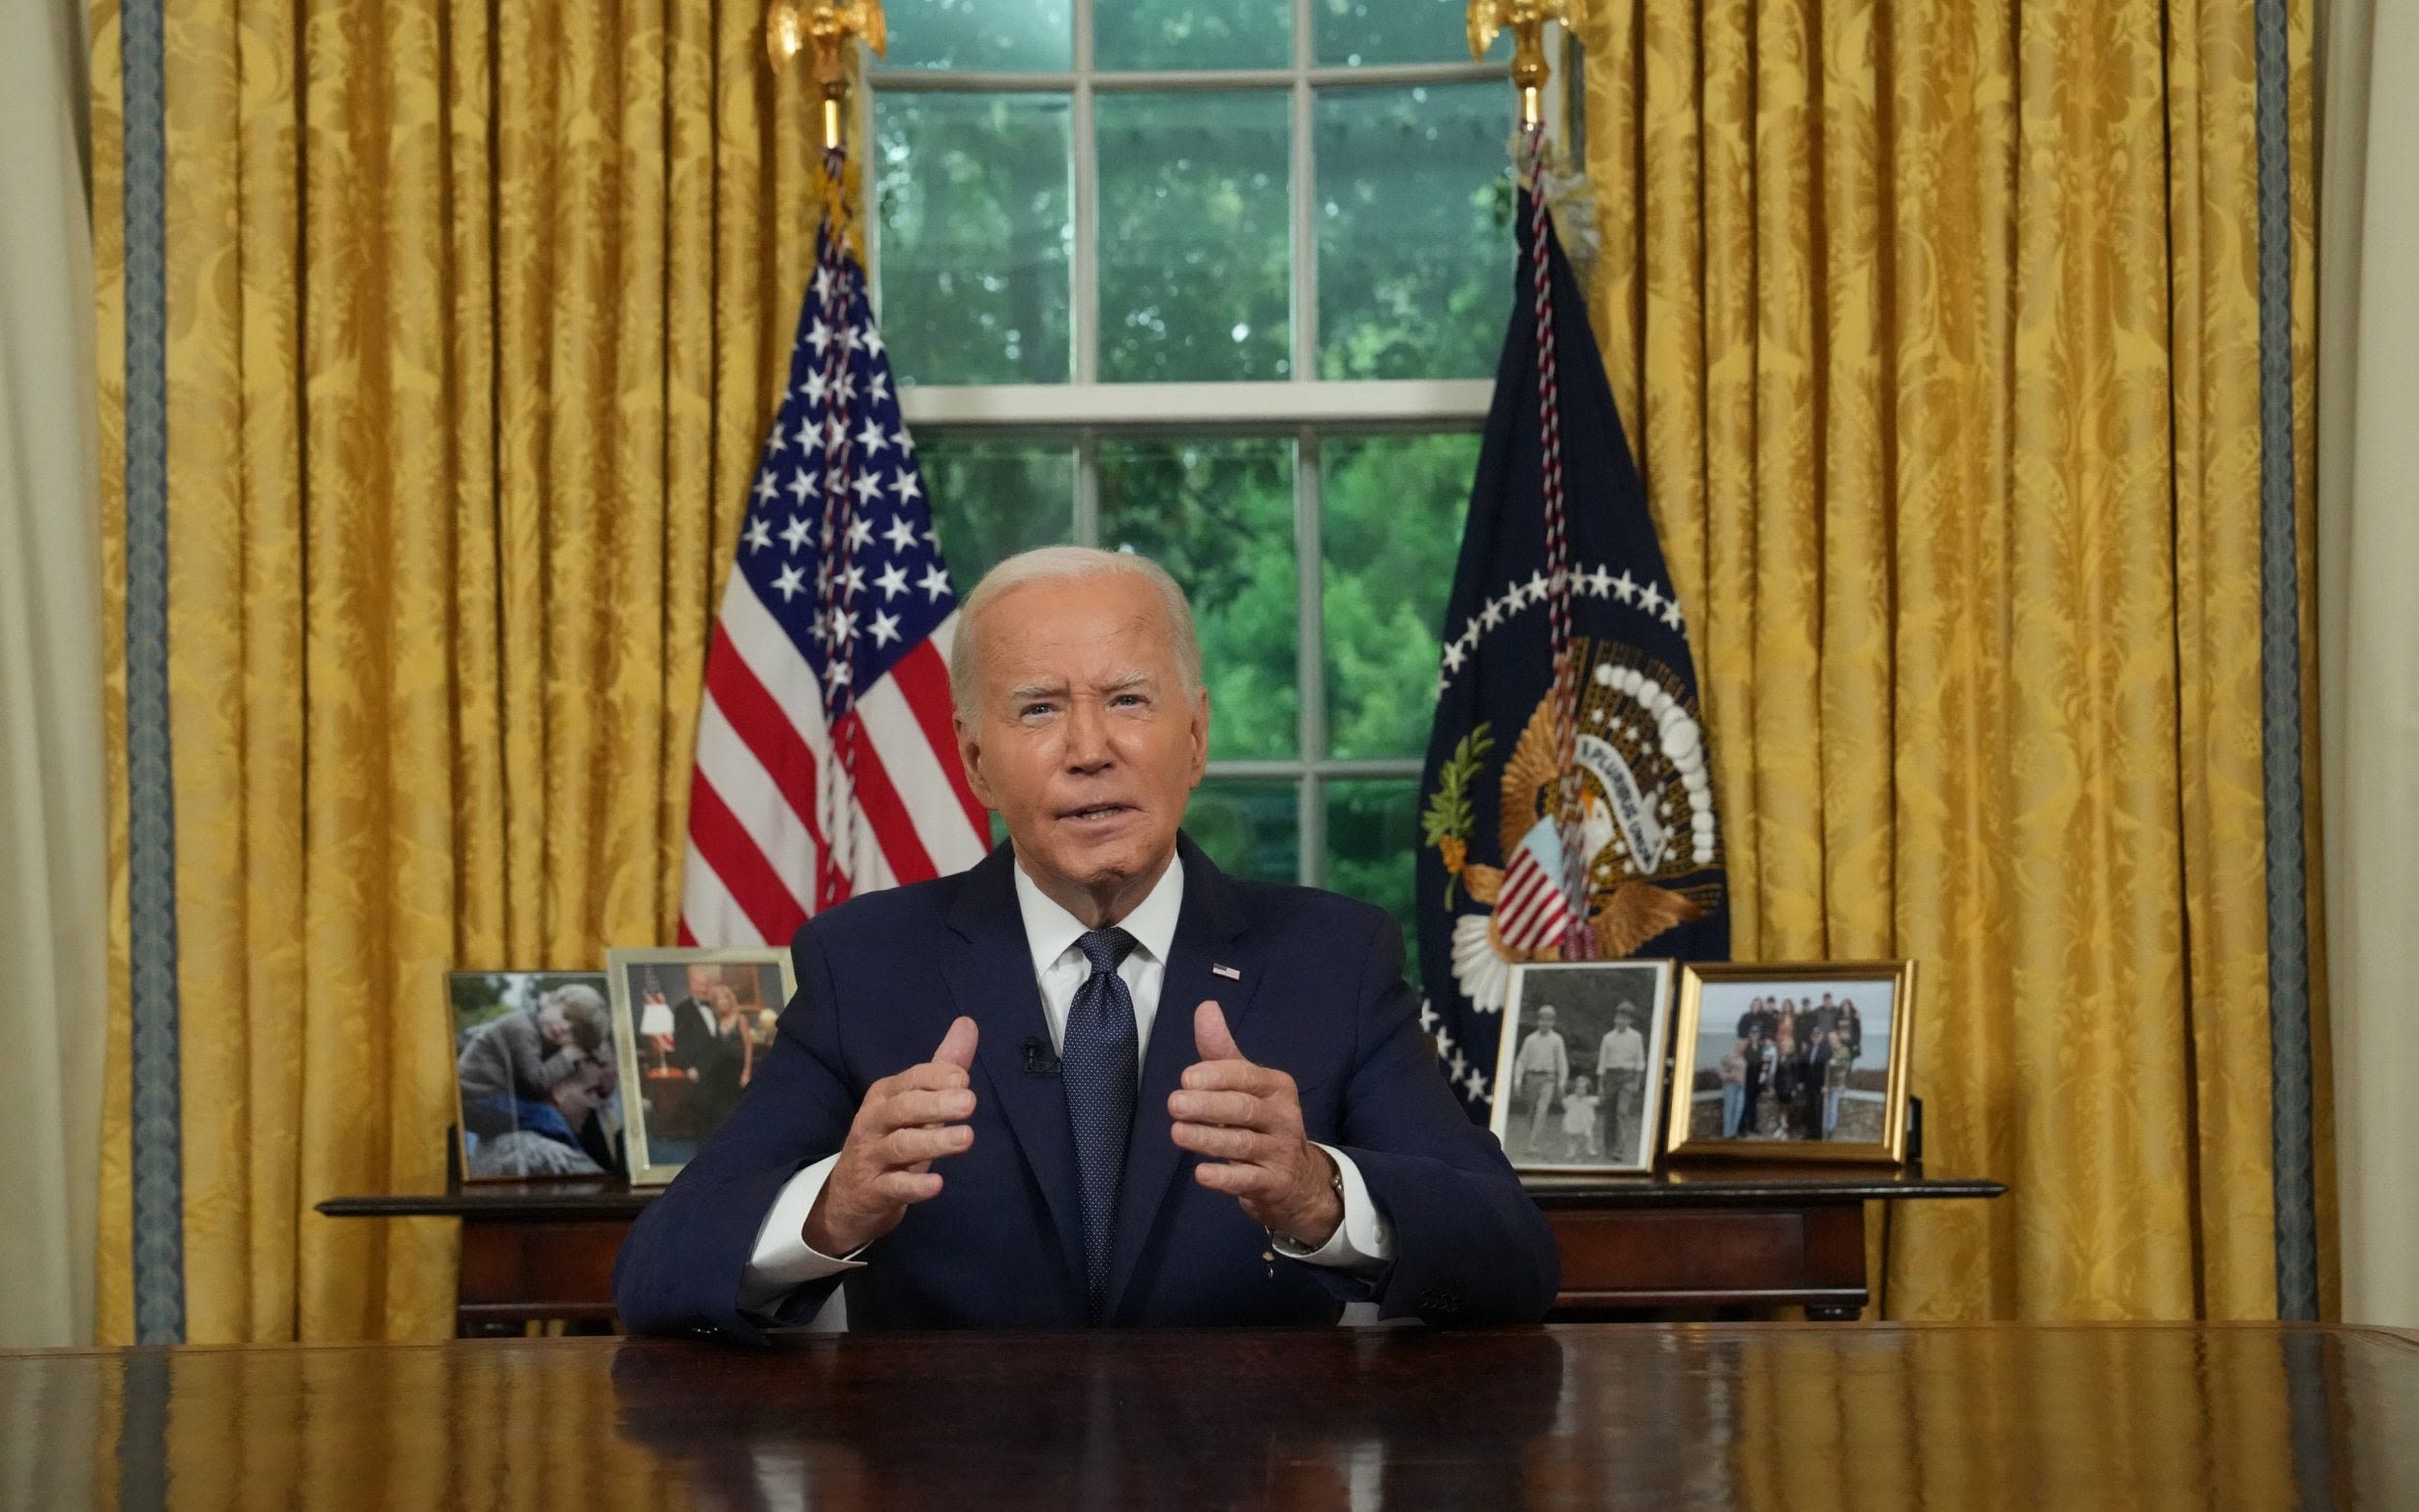 Watch: Biden says US can resolve differences at ‘battle box’ in latest gaffe